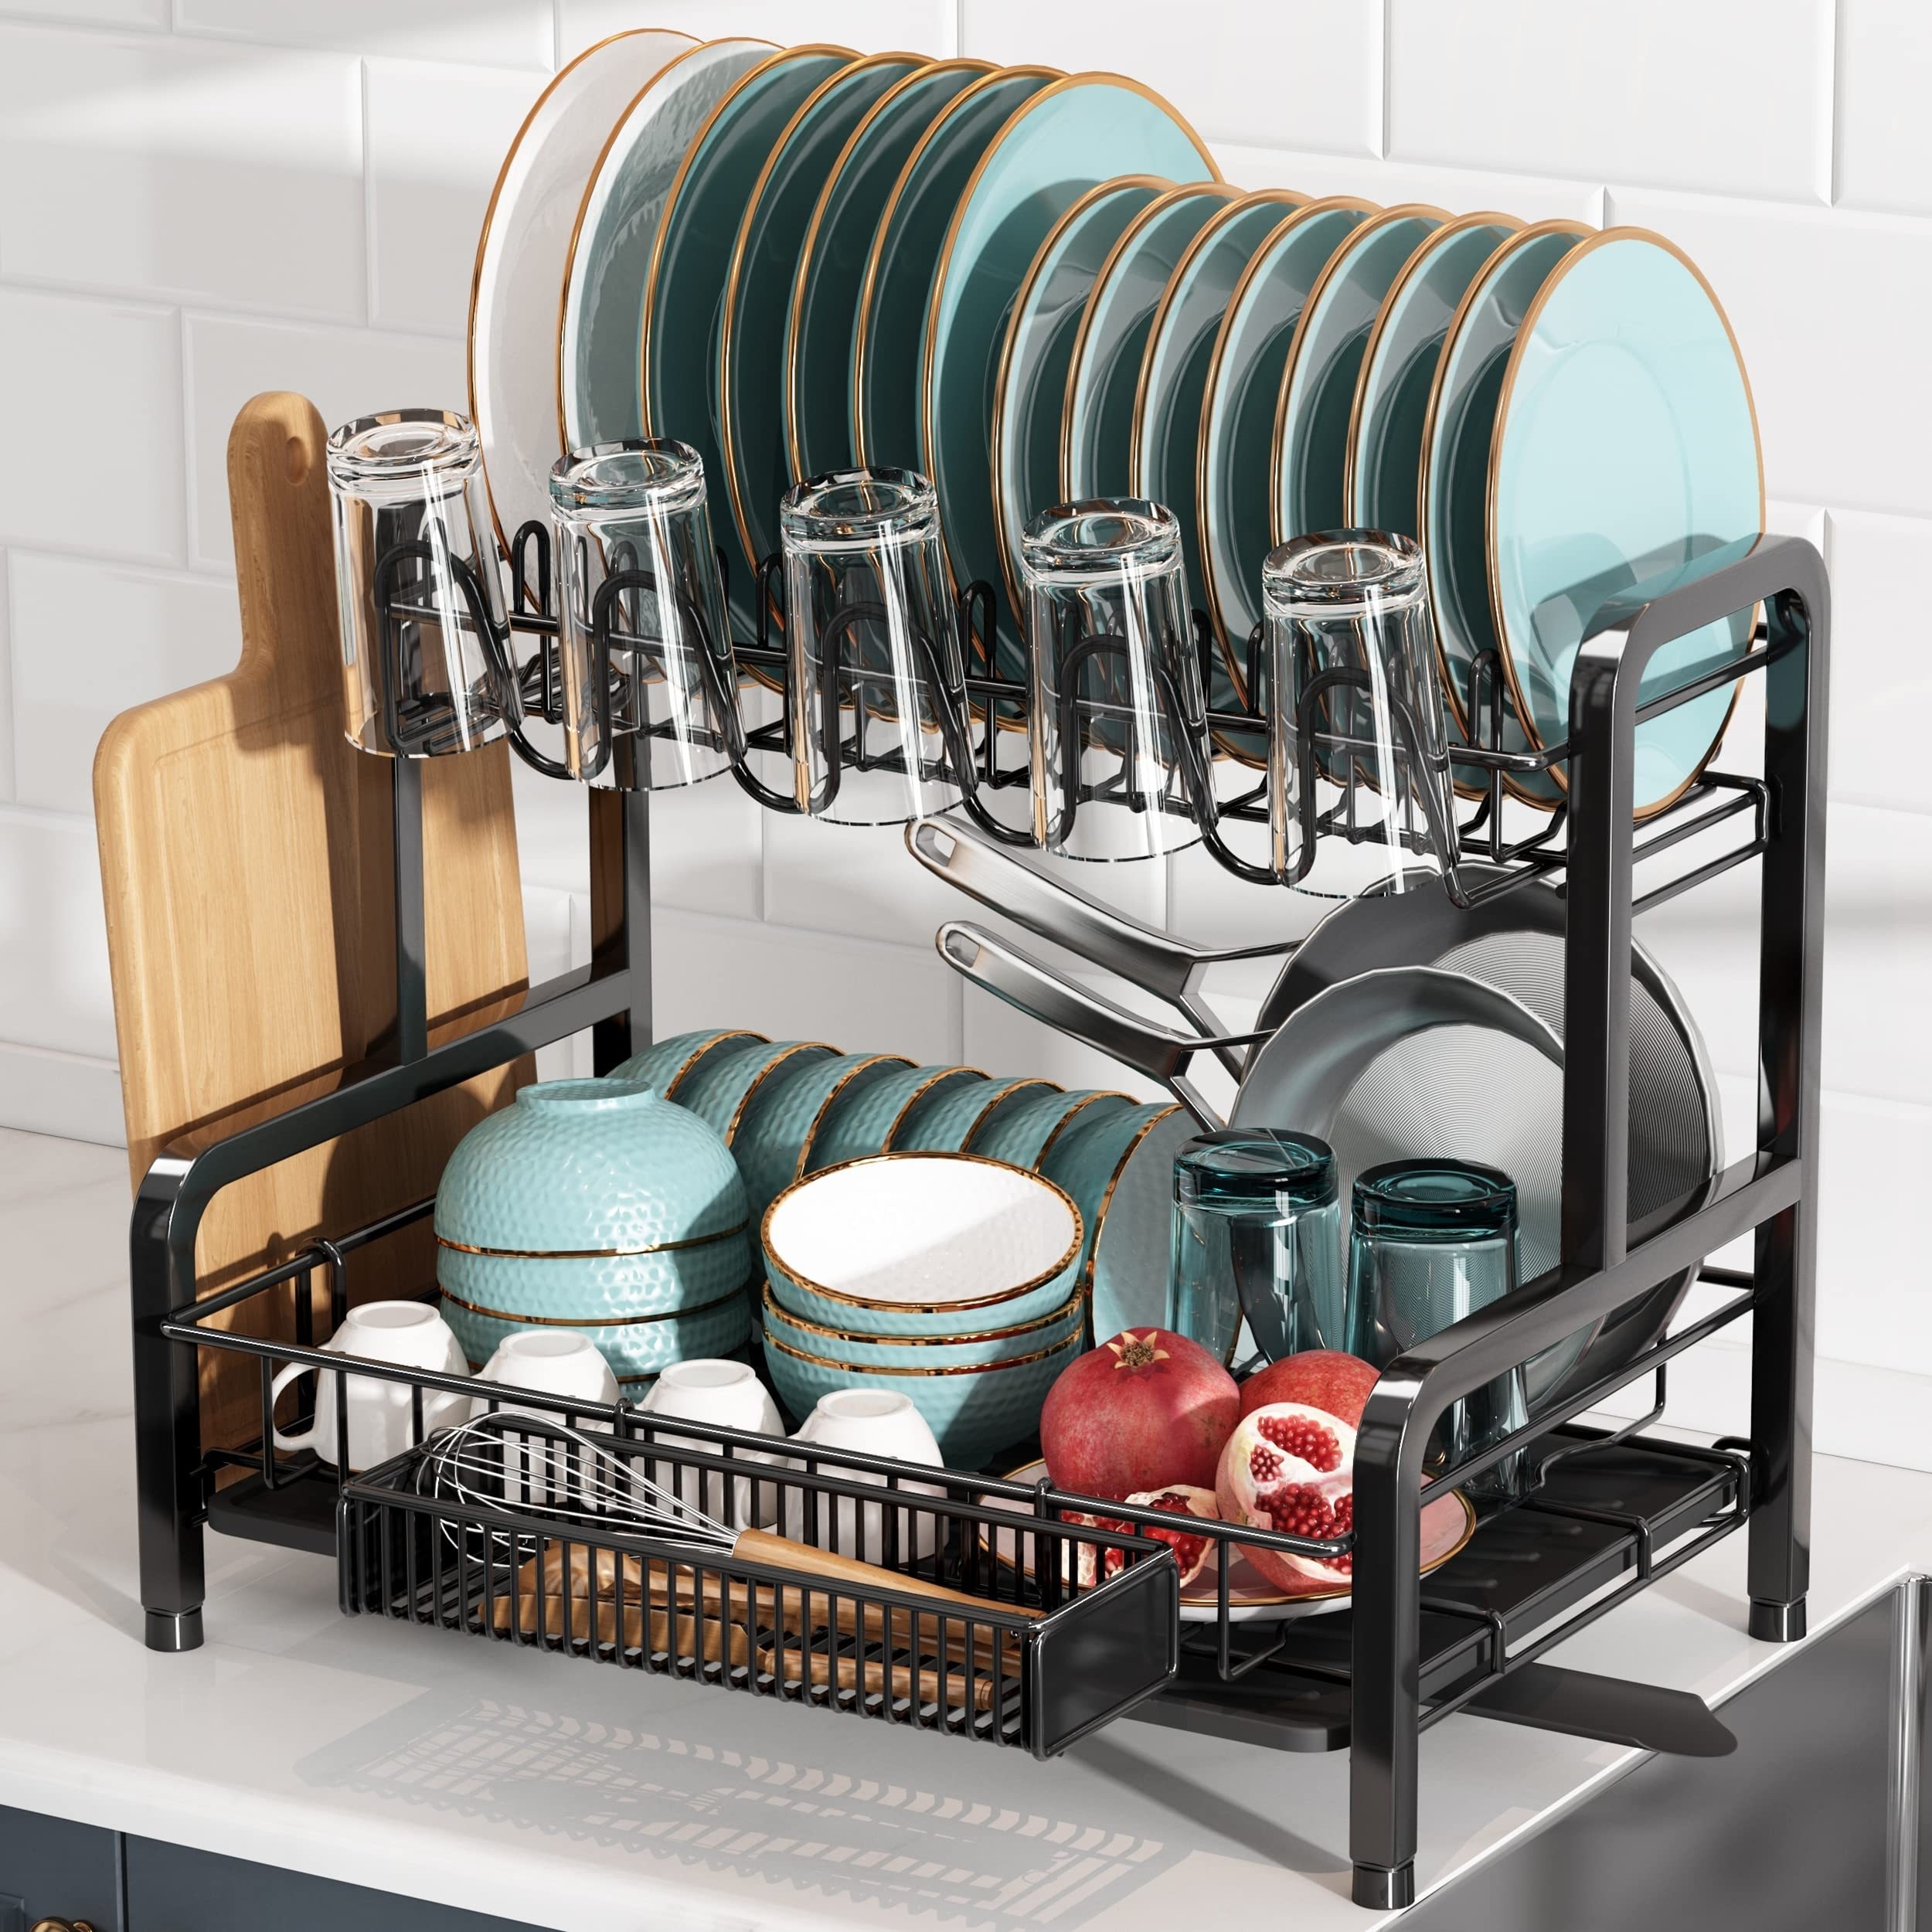 romision Dish Drying Rack for Kitchen Counter, Stainless Steel Large 2 Tier  Dish Racks and Drainboard Set, Black Dish Drainer with Utensil Holder